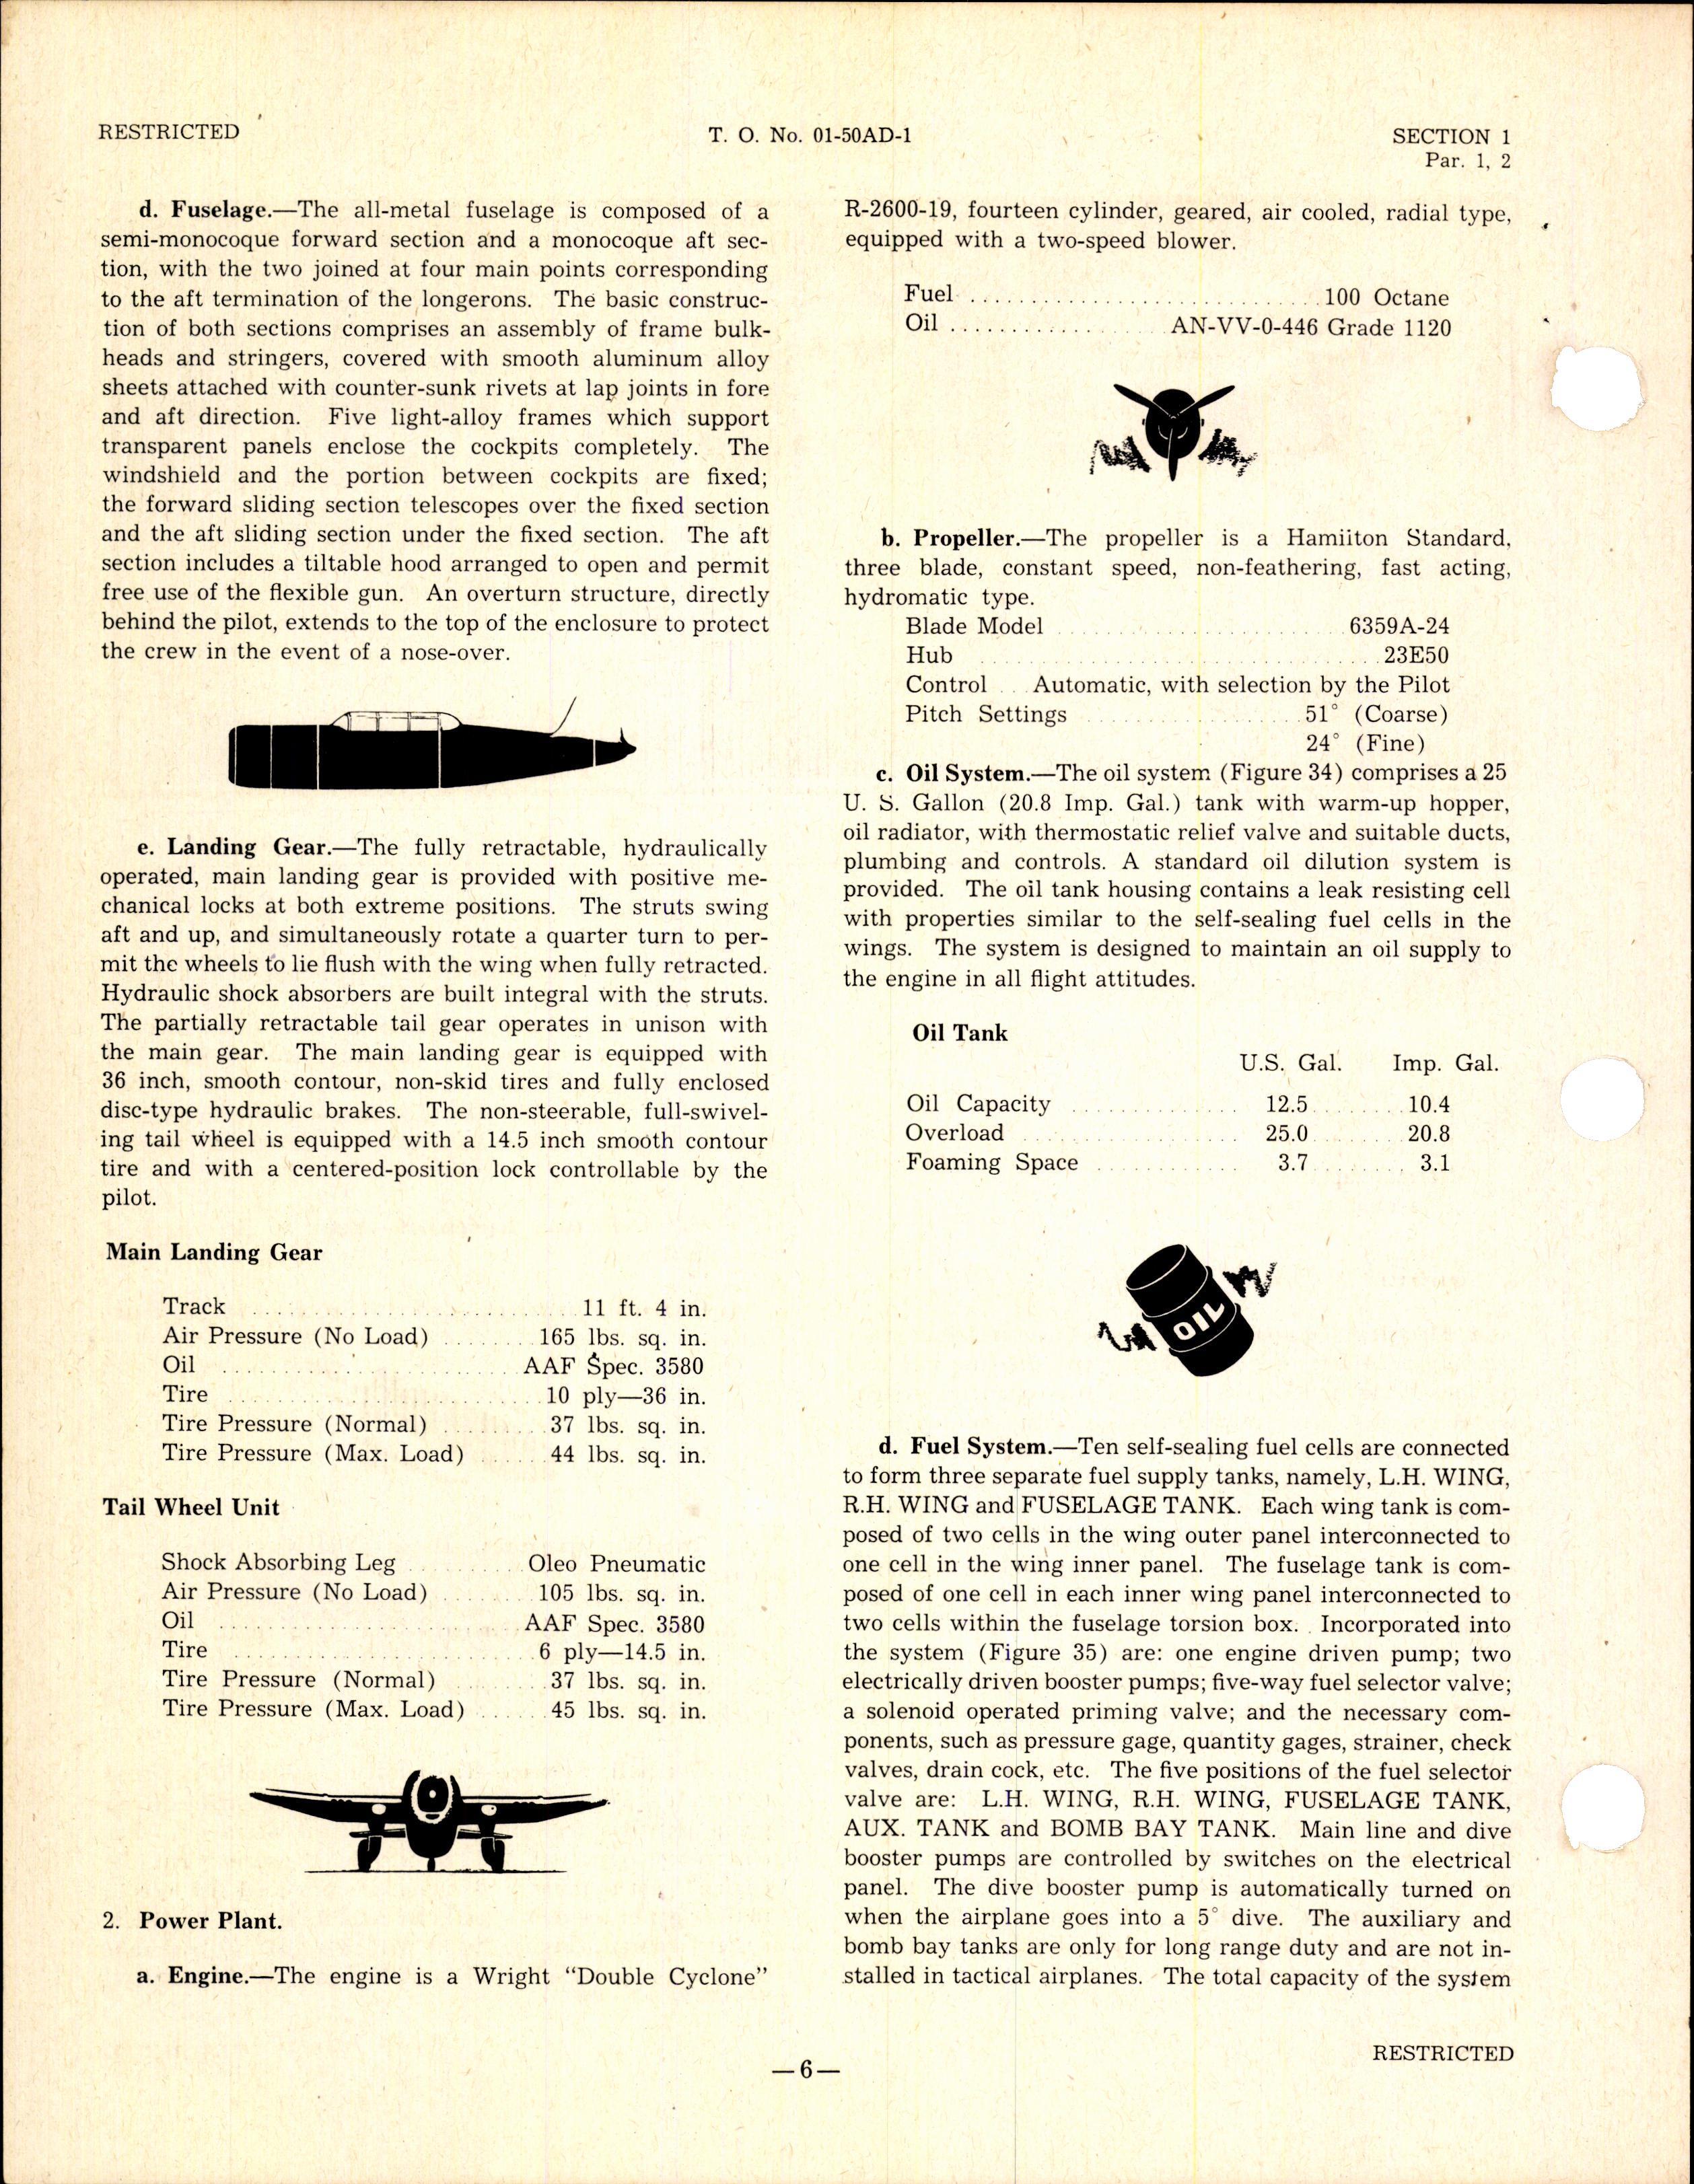 Sample page 8 from AirCorps Library document: Pilot's Flight Operating Instructions for Army Model A-35A-1-VN